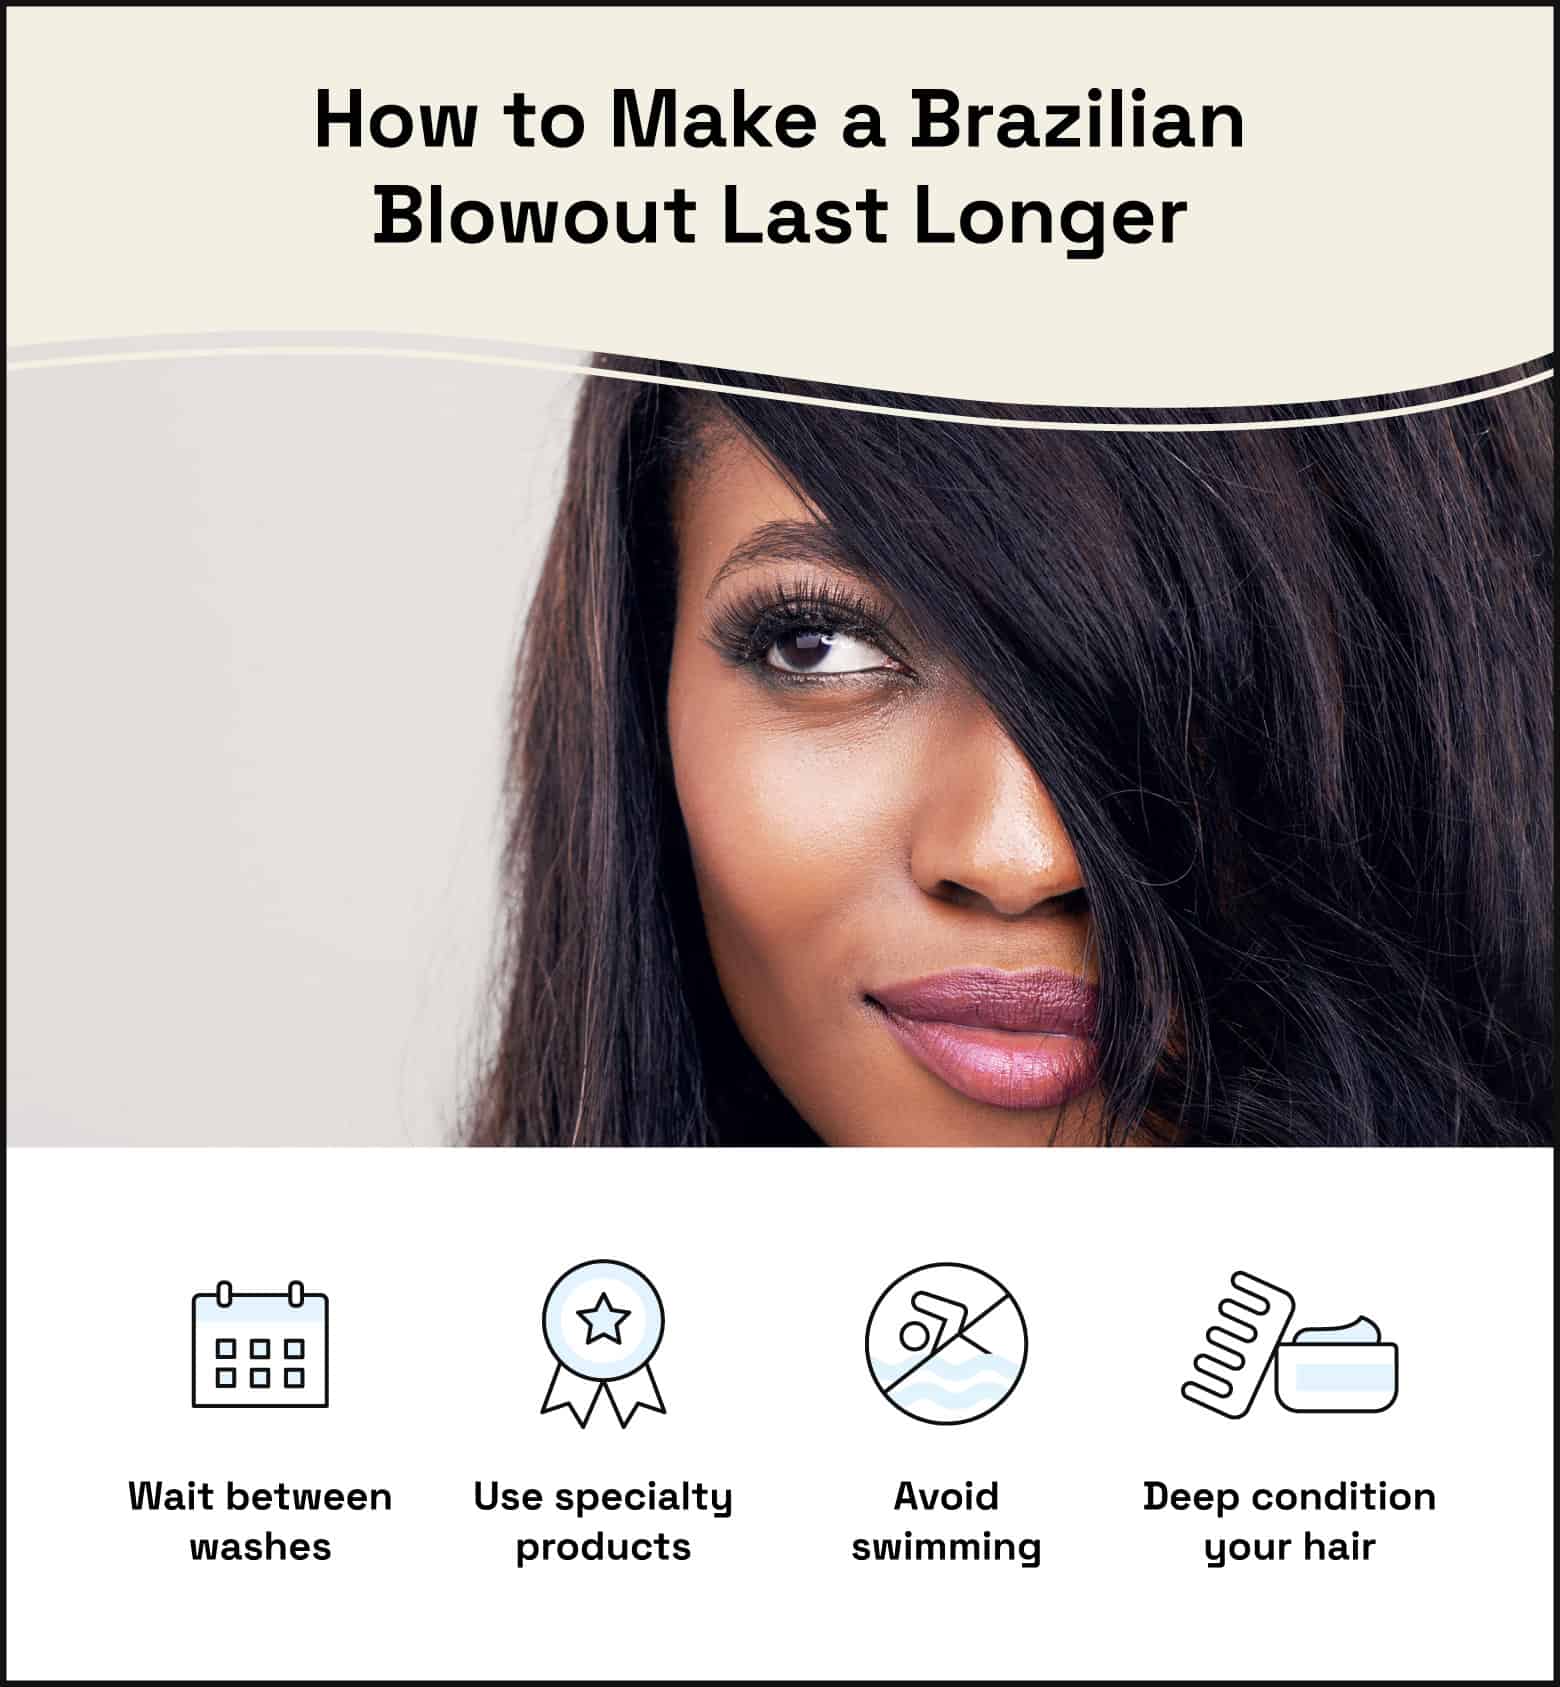 photo of woman with long hair covering side of face and showing other side, text on the bottom summarizing ways to make a Brazilian blowout last longer